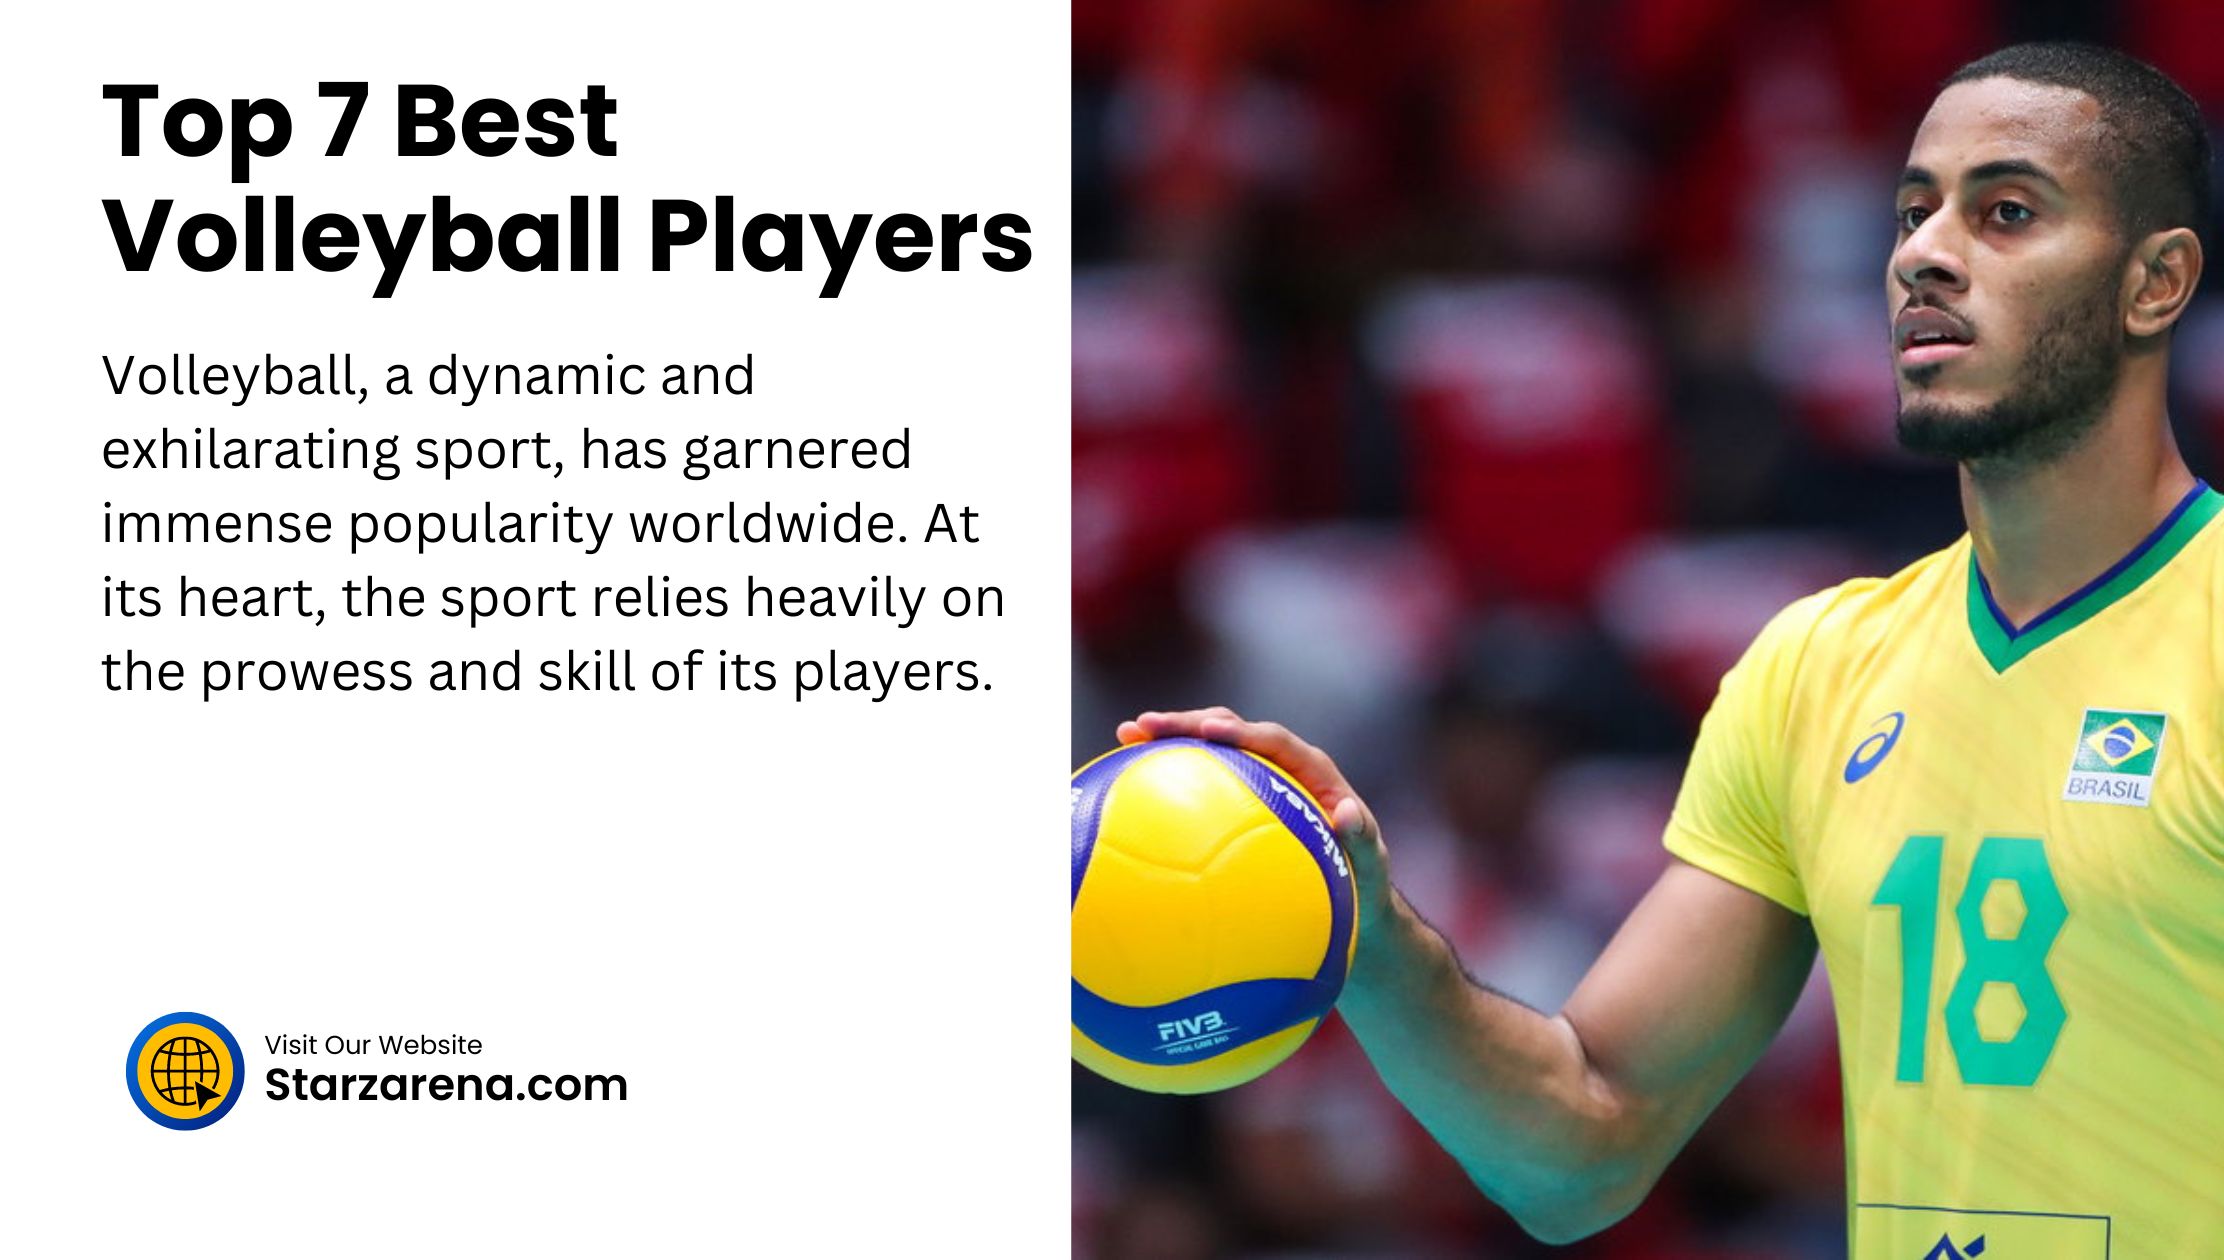 Top 7 Best Volleyball Players